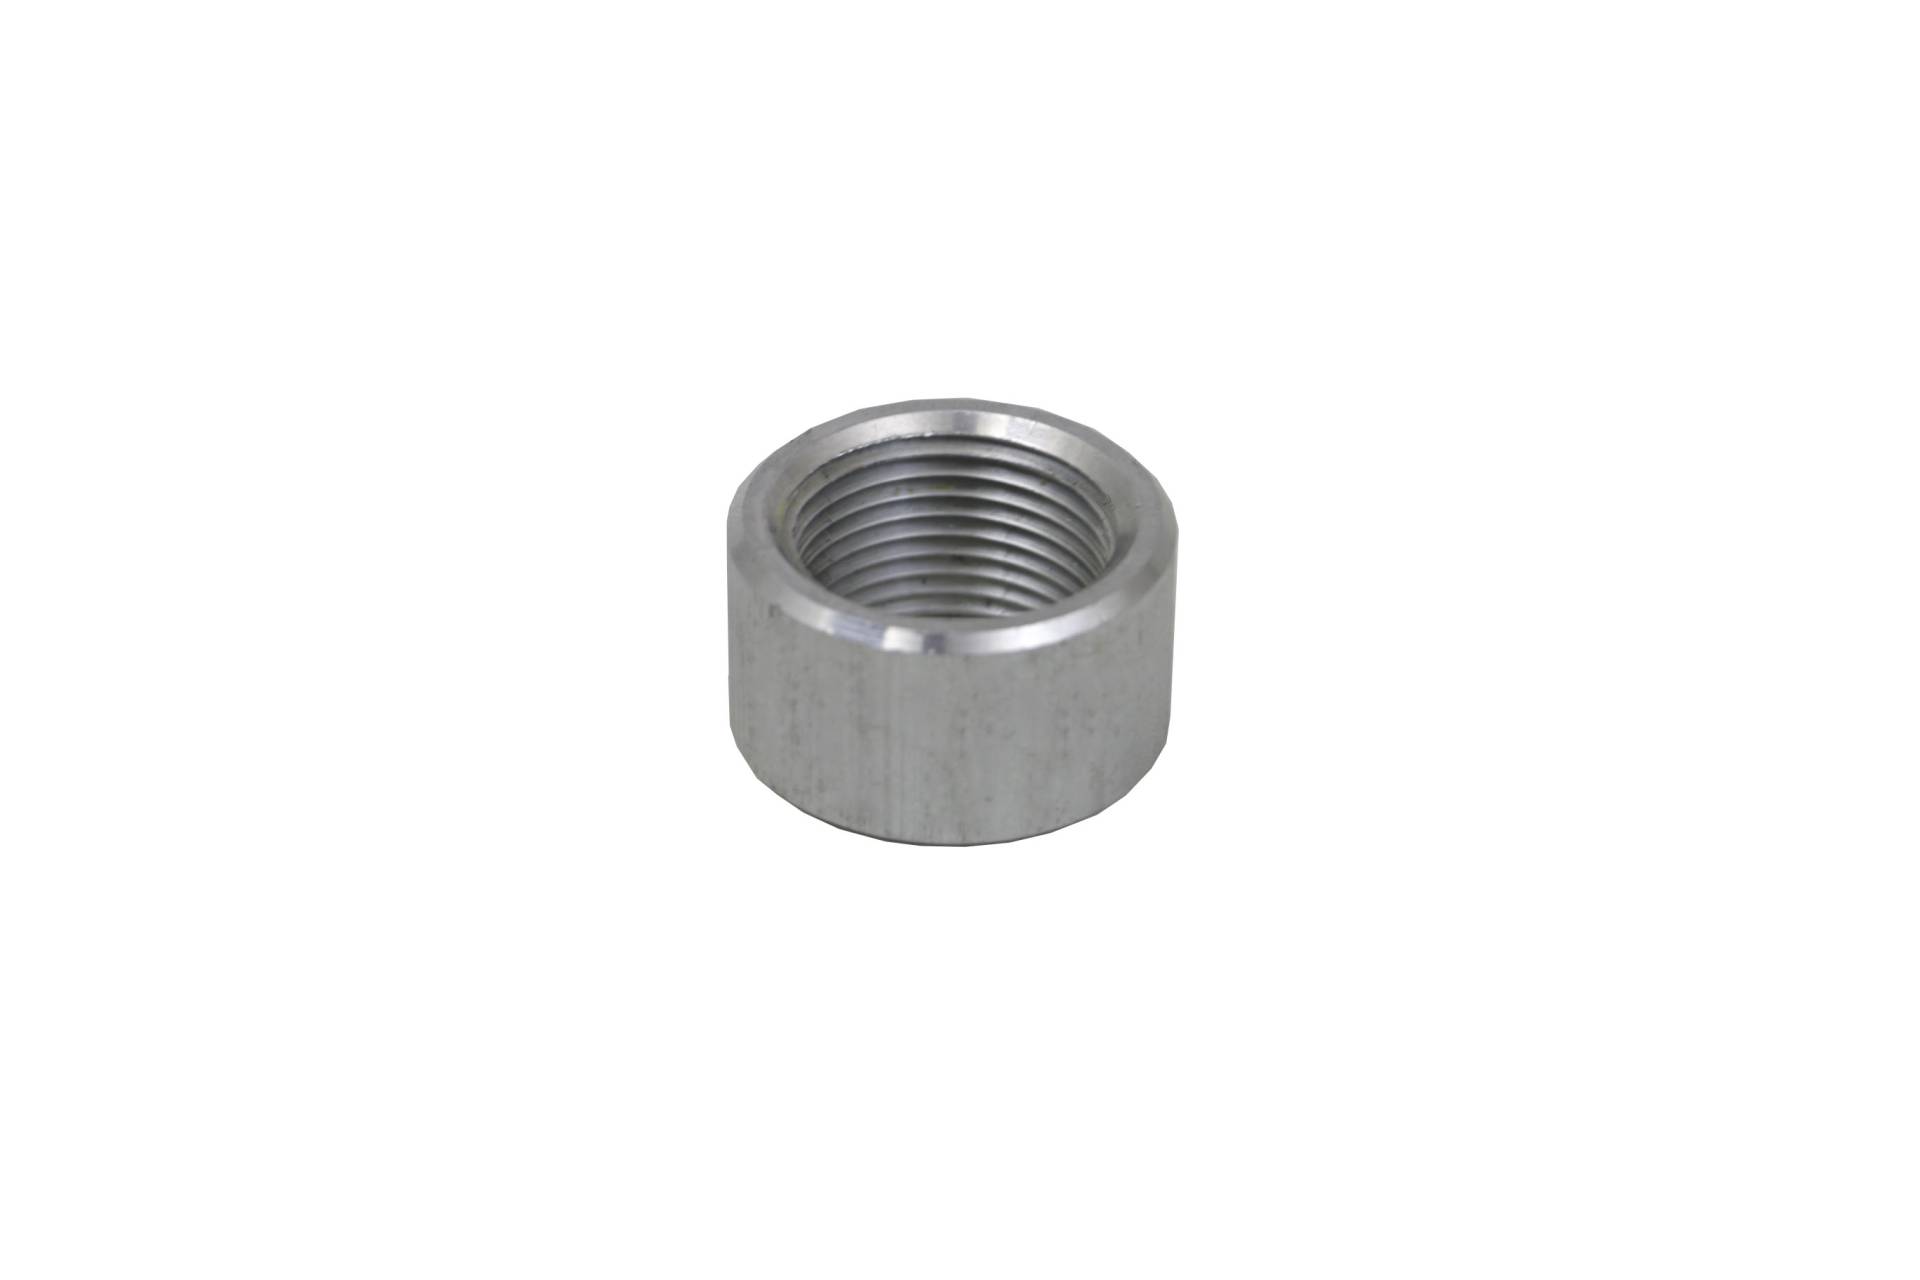 Wizard Cooling Inc - Weldable Pipe Thread Bungs 1/2" NPT Bung